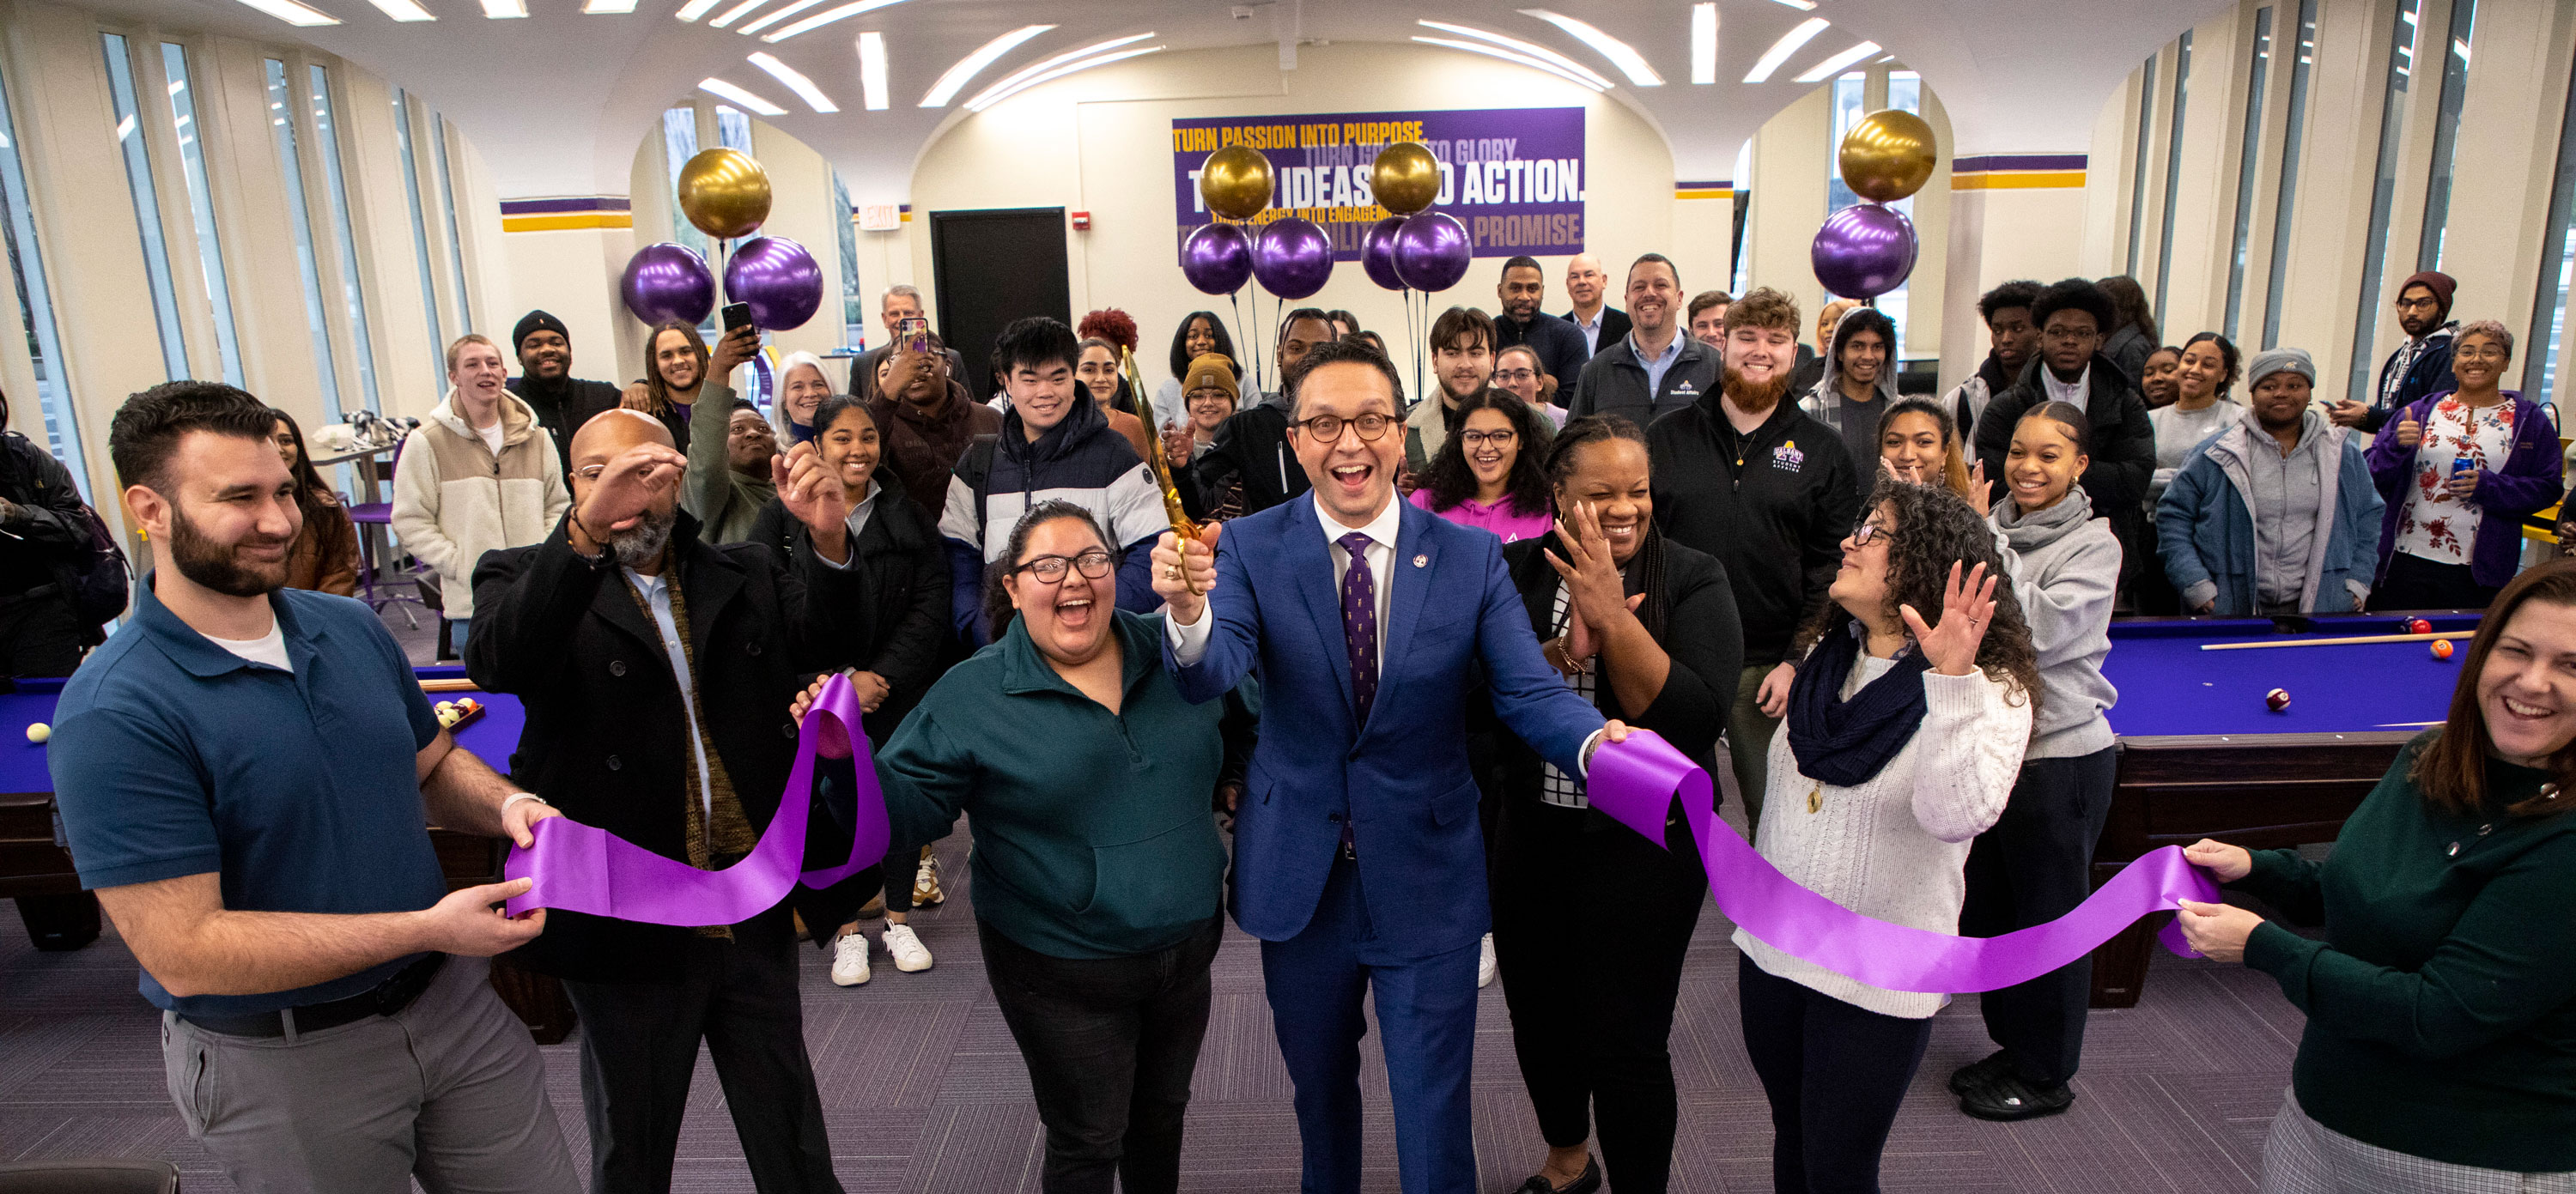 Student Affairs leadership cheers and smiles as they cut a purple ribbon inside UAlbany's new game room.